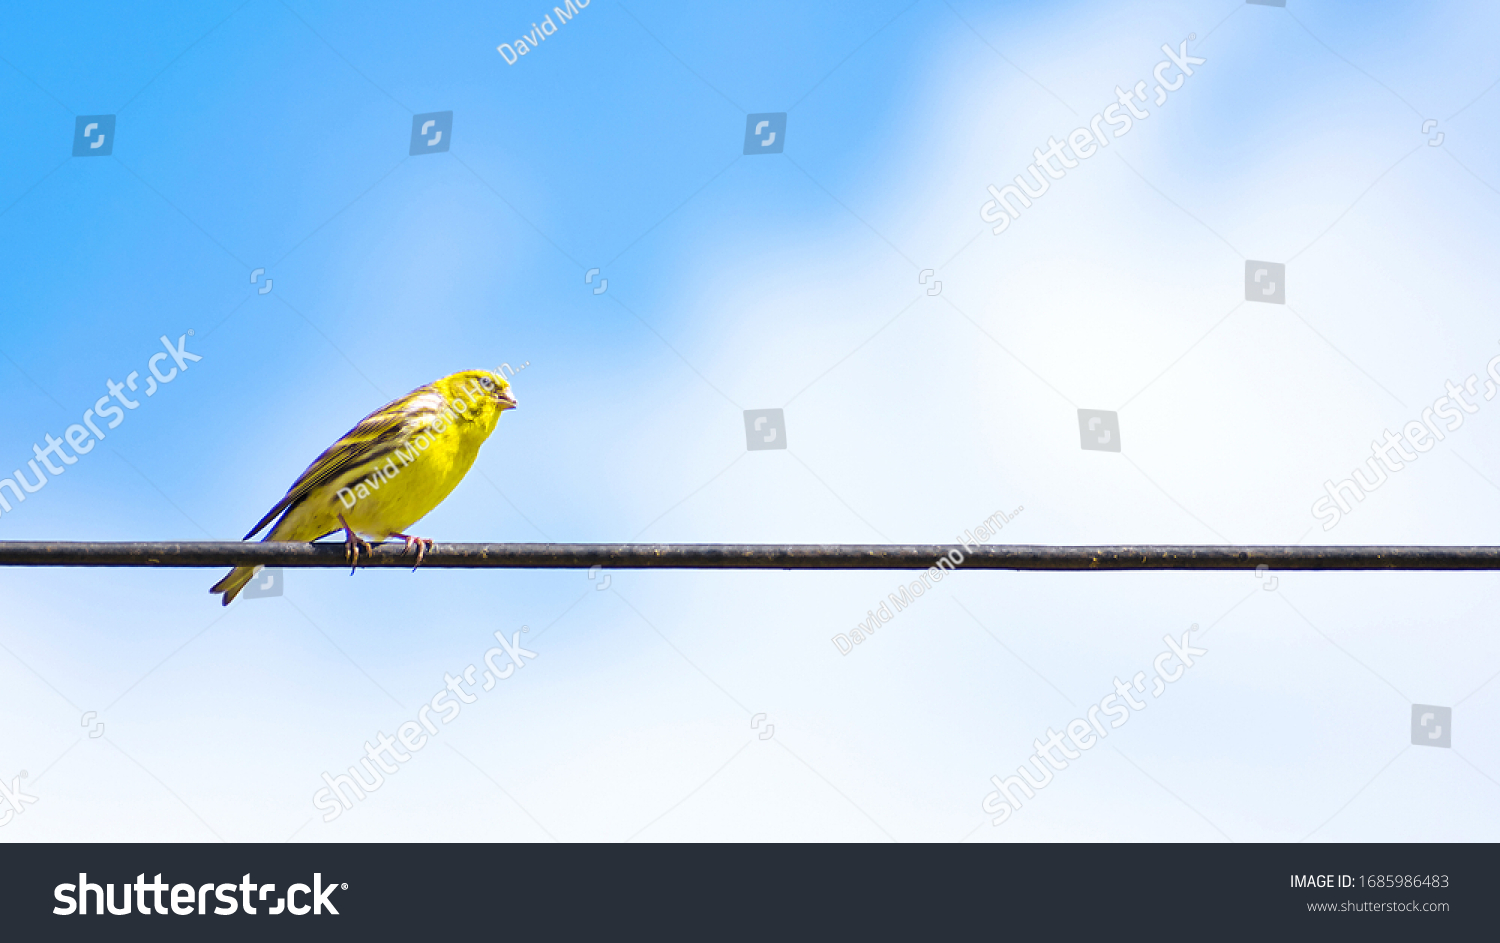 The Atlantic canary bird Serinus canaria , canaries, island canary, canary, or common canaries birds perched on an electric wire. #1685986483